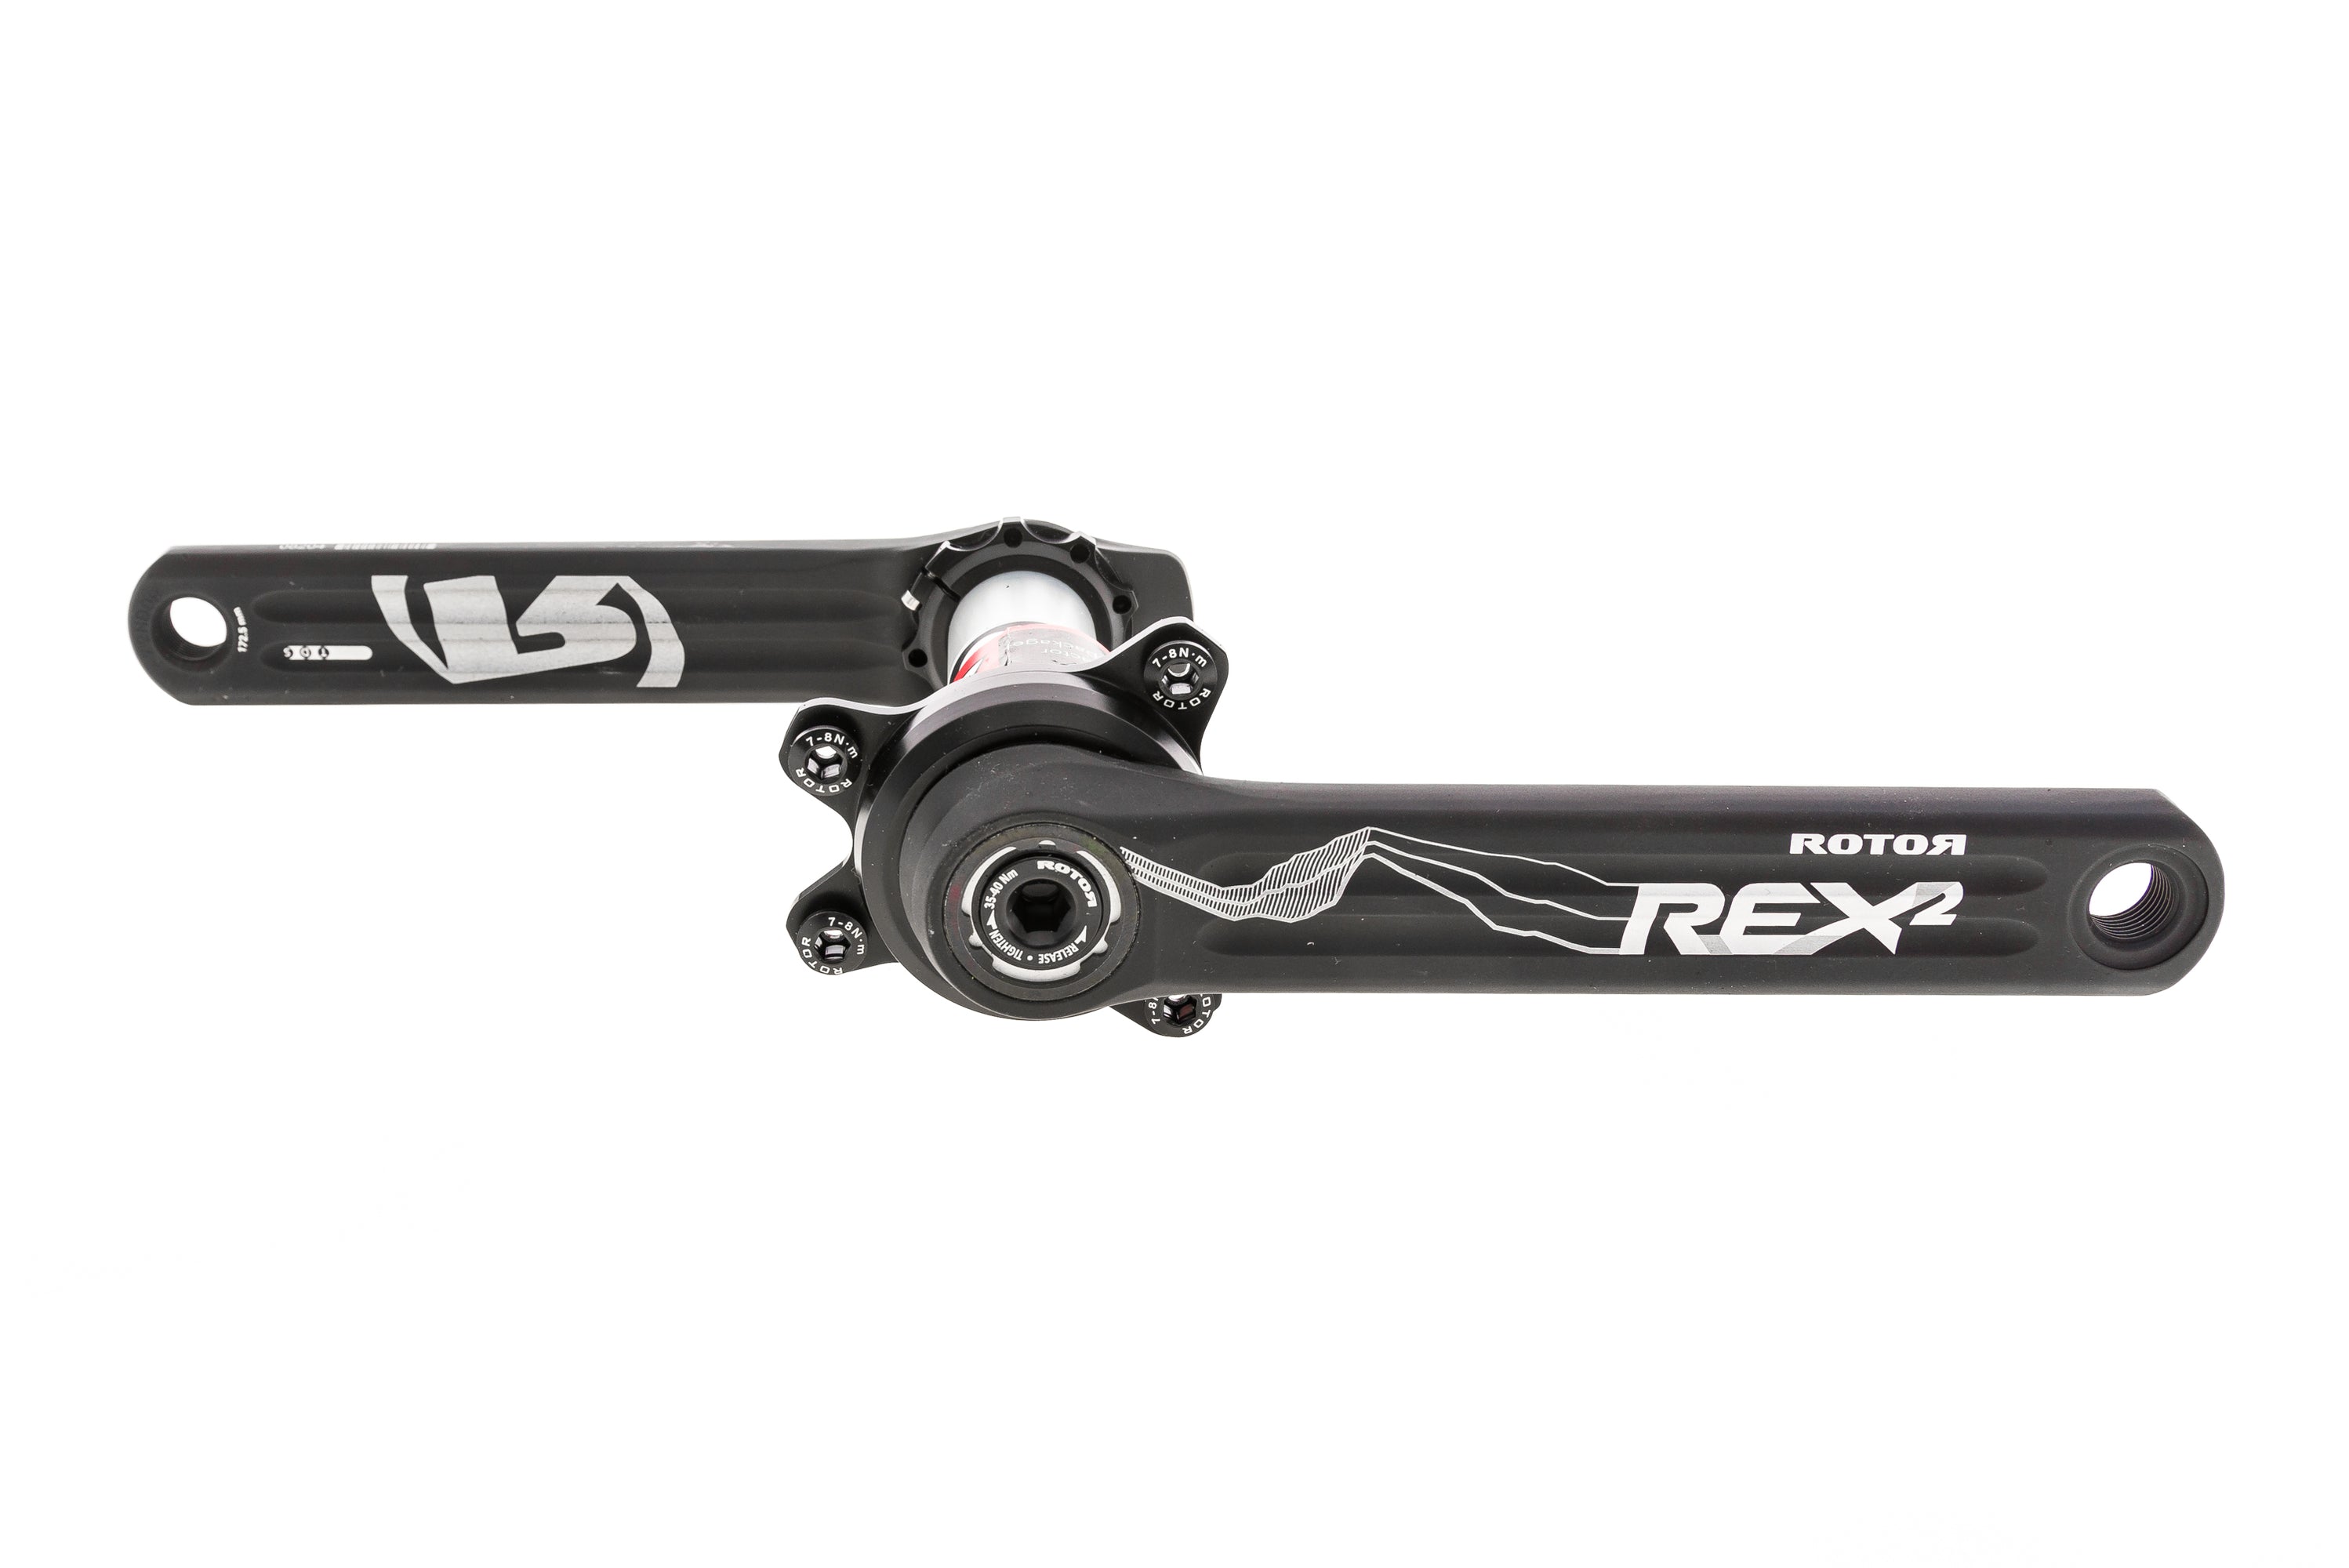 Rotor Rex 2.1 InPower Power Meter Crank Set 11s 172.5mm 76 mm BCD BB30 PF30 drive side